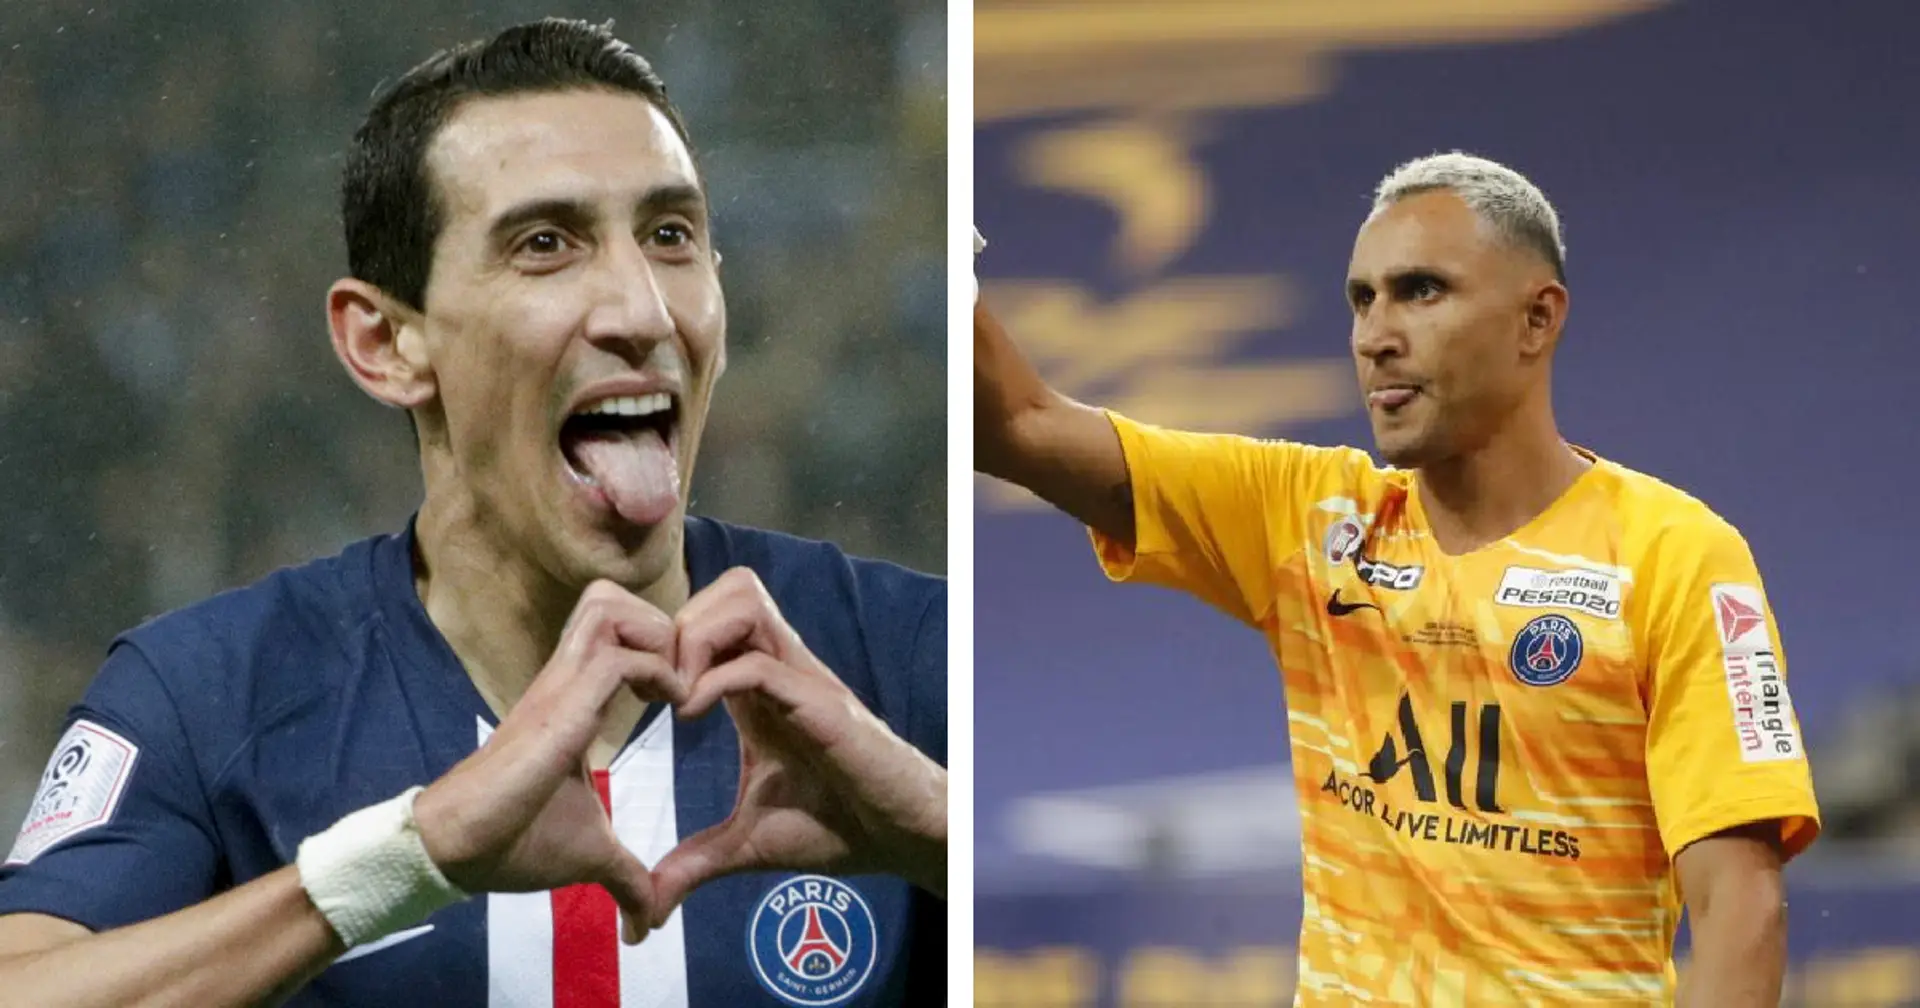 Di Maria and Navas closing in on emulating Clarence Seedorf's post-Real Madrid success 